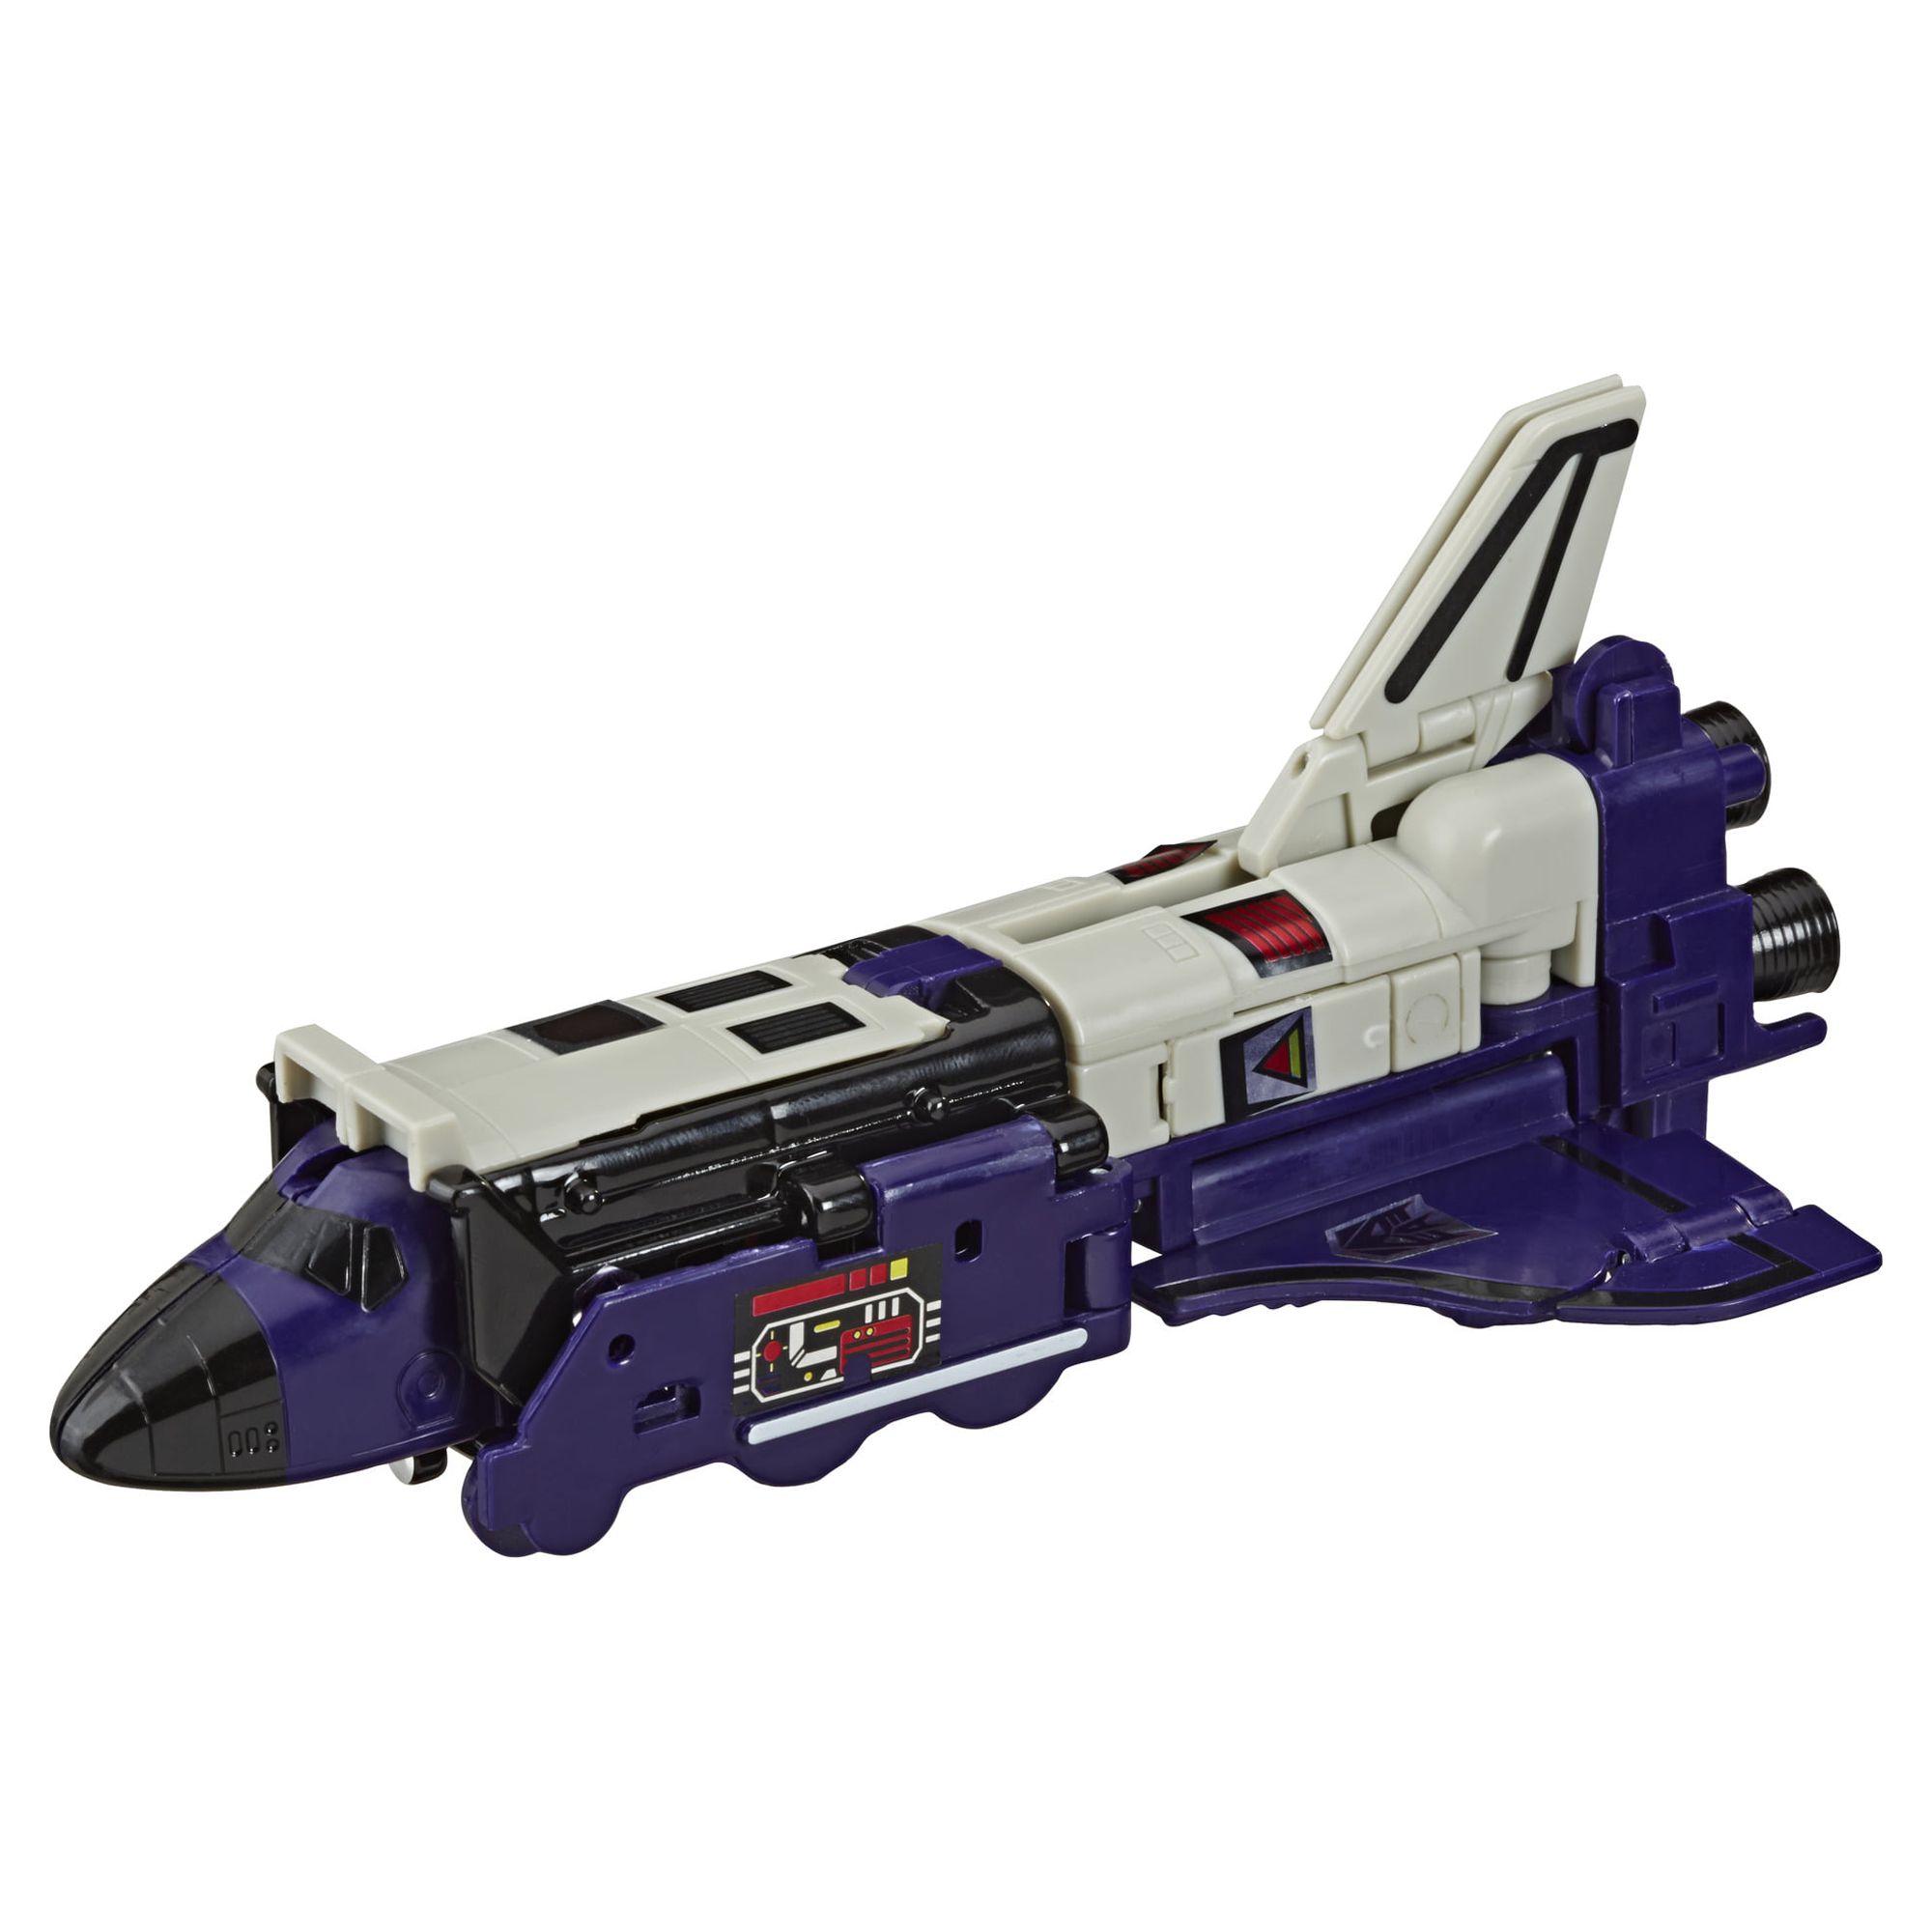 Transformers Toys Vintage G1 Astrotrain 4.5 Inch Action Figure Toy, Accessory - image 4 of 9